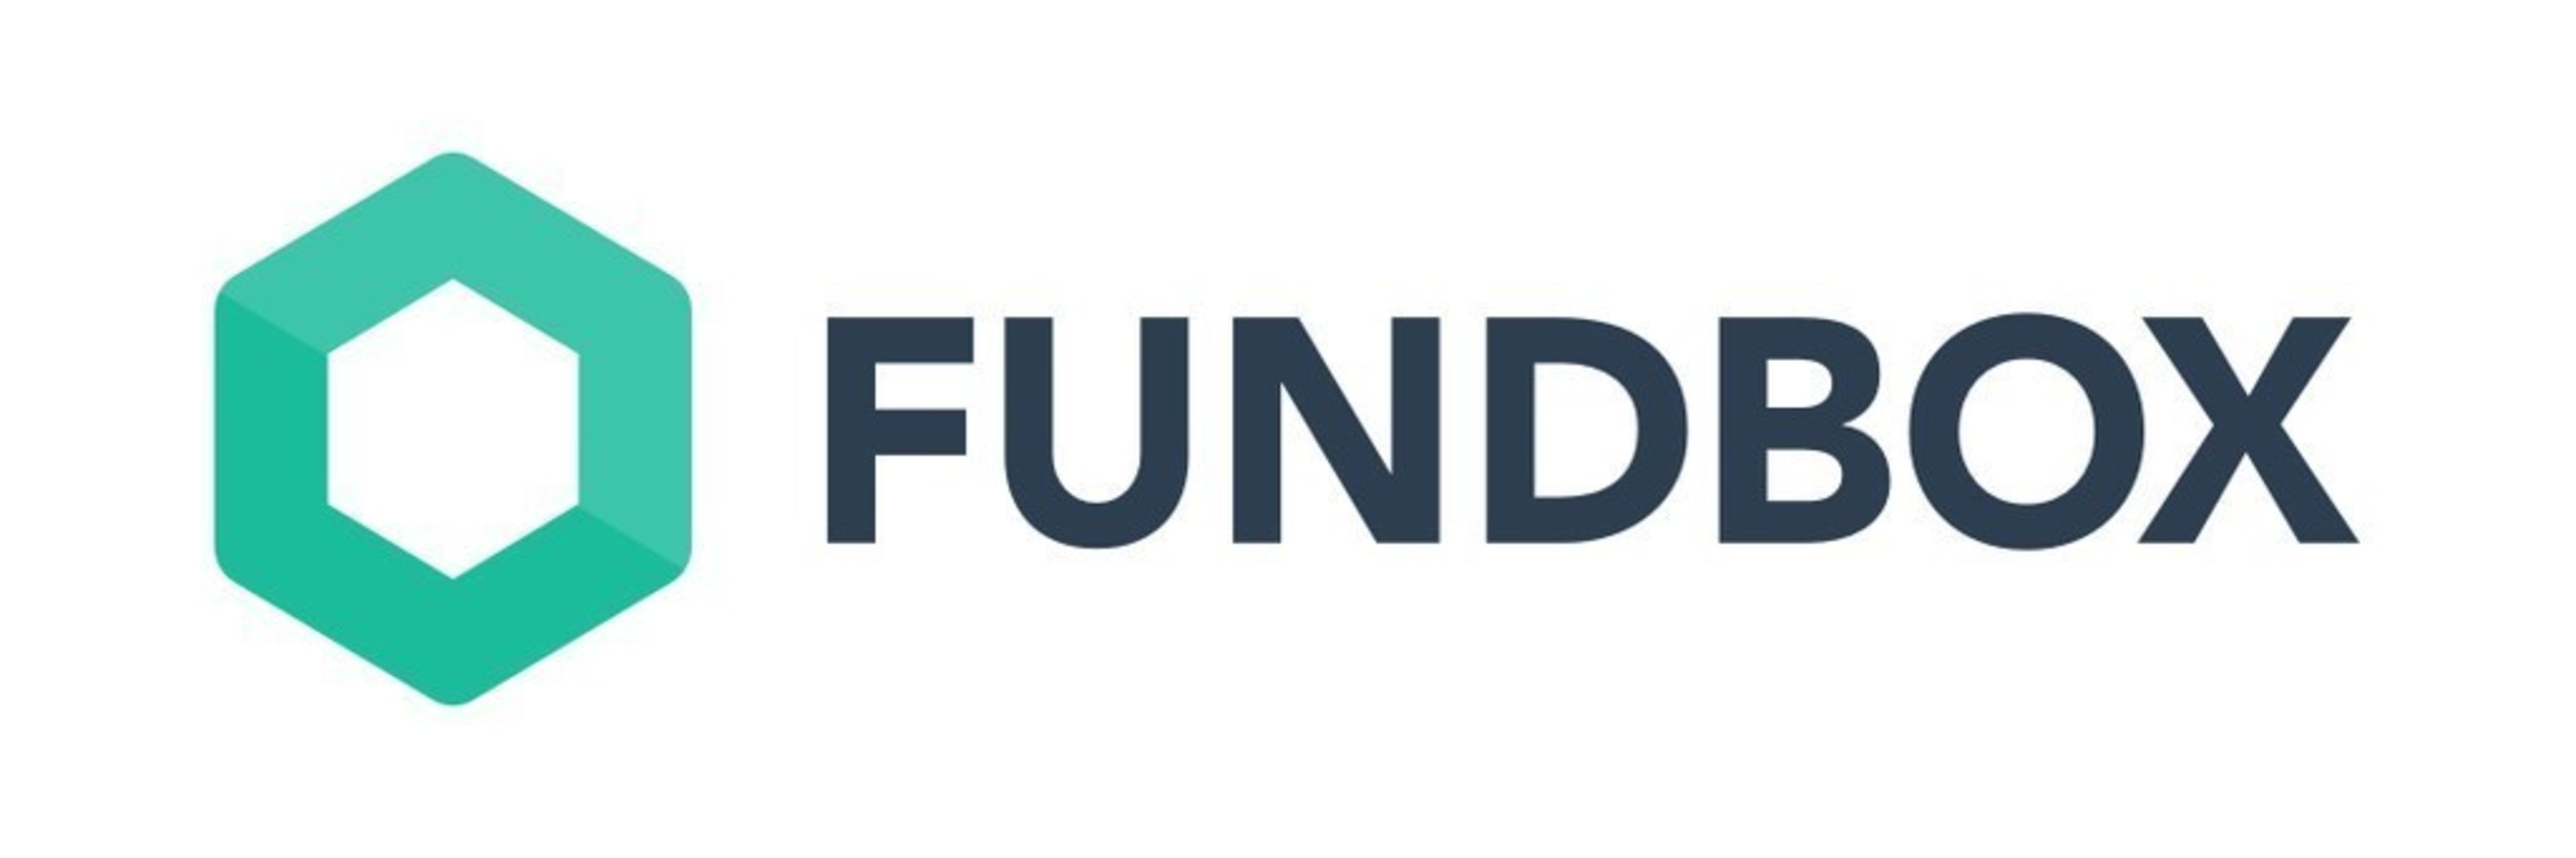 Fundbox launches mobile app